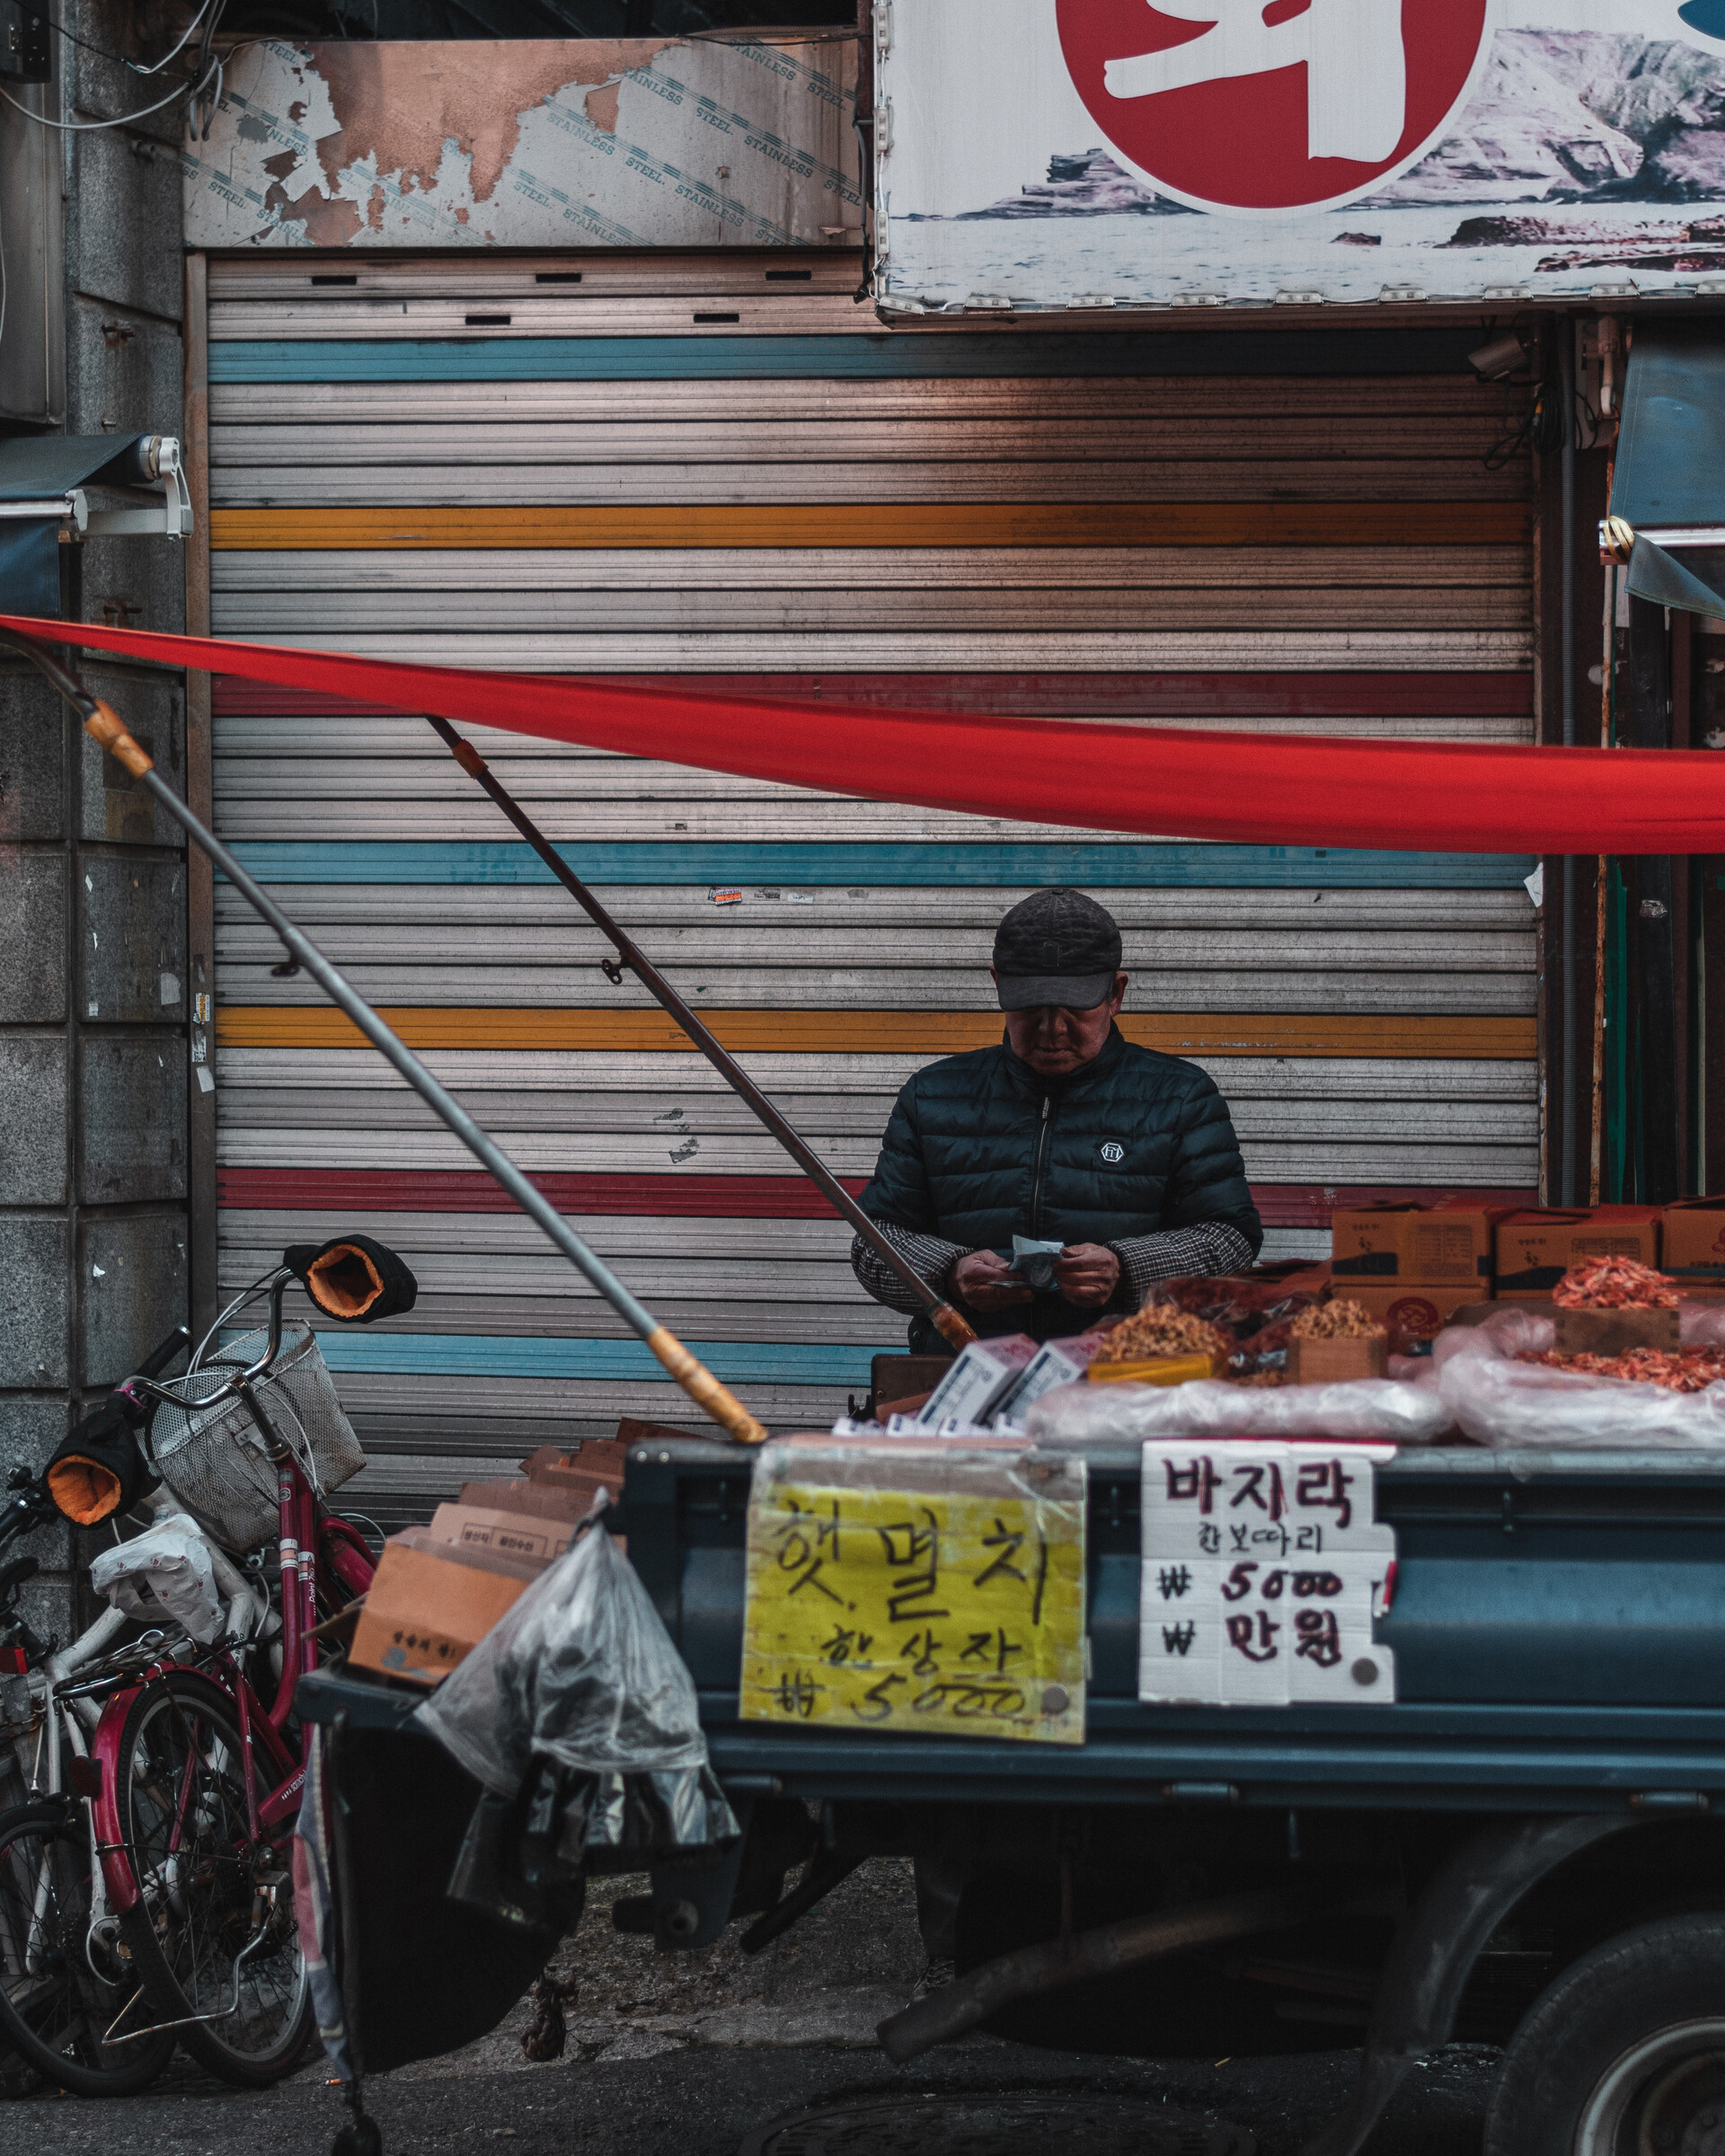 Street Markets - Elderly - Poverty. These three are tied together and define most of the streets of Seoul